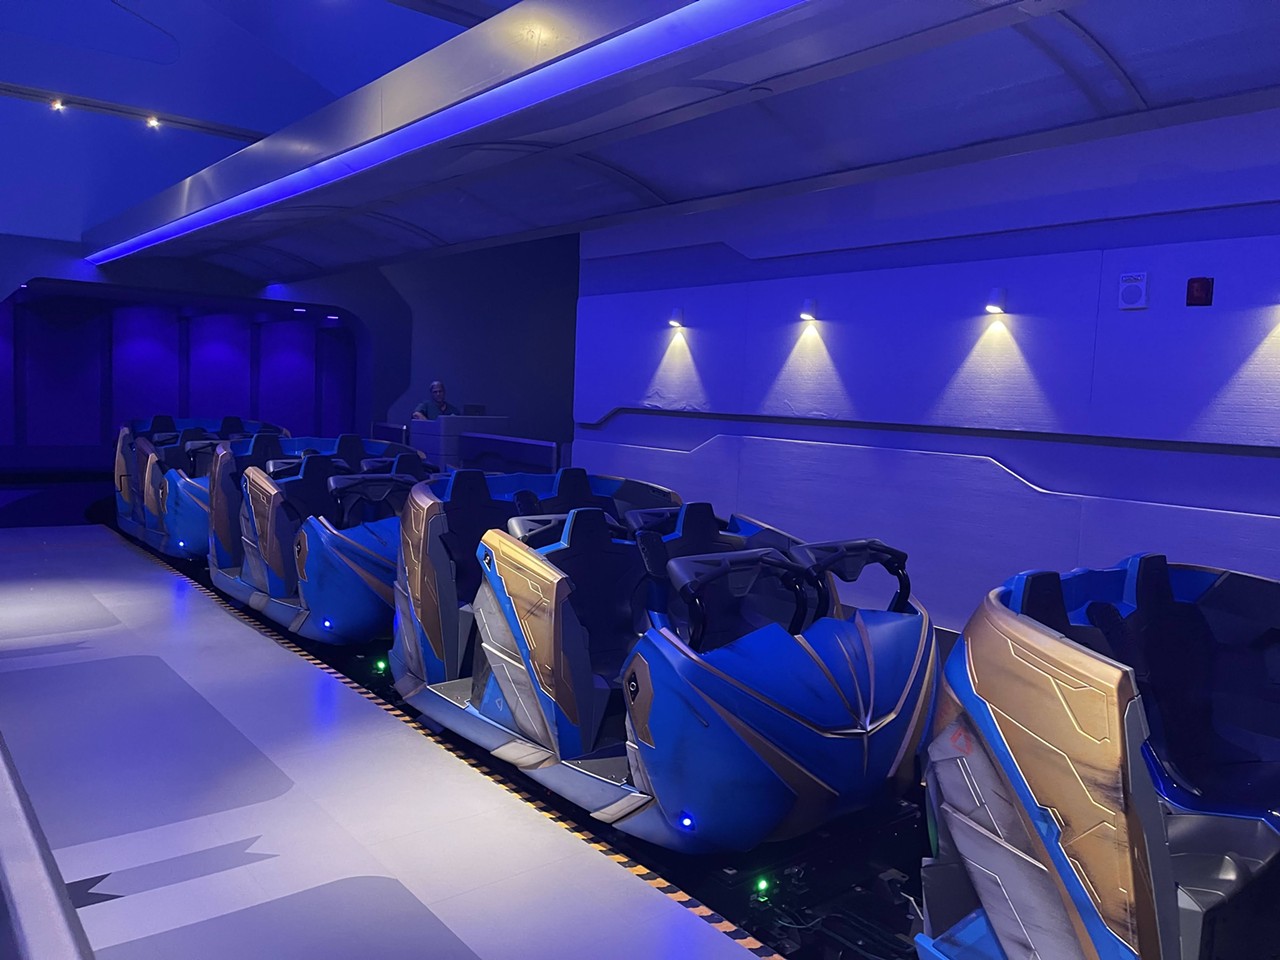 Ride the Guardians ride 30 times
Epcot
The newly opened Guardians: Cosmic Rewind ride is fully indoors, offering a bit of a break from the brutal heat of Florida (and an escape from the planet).